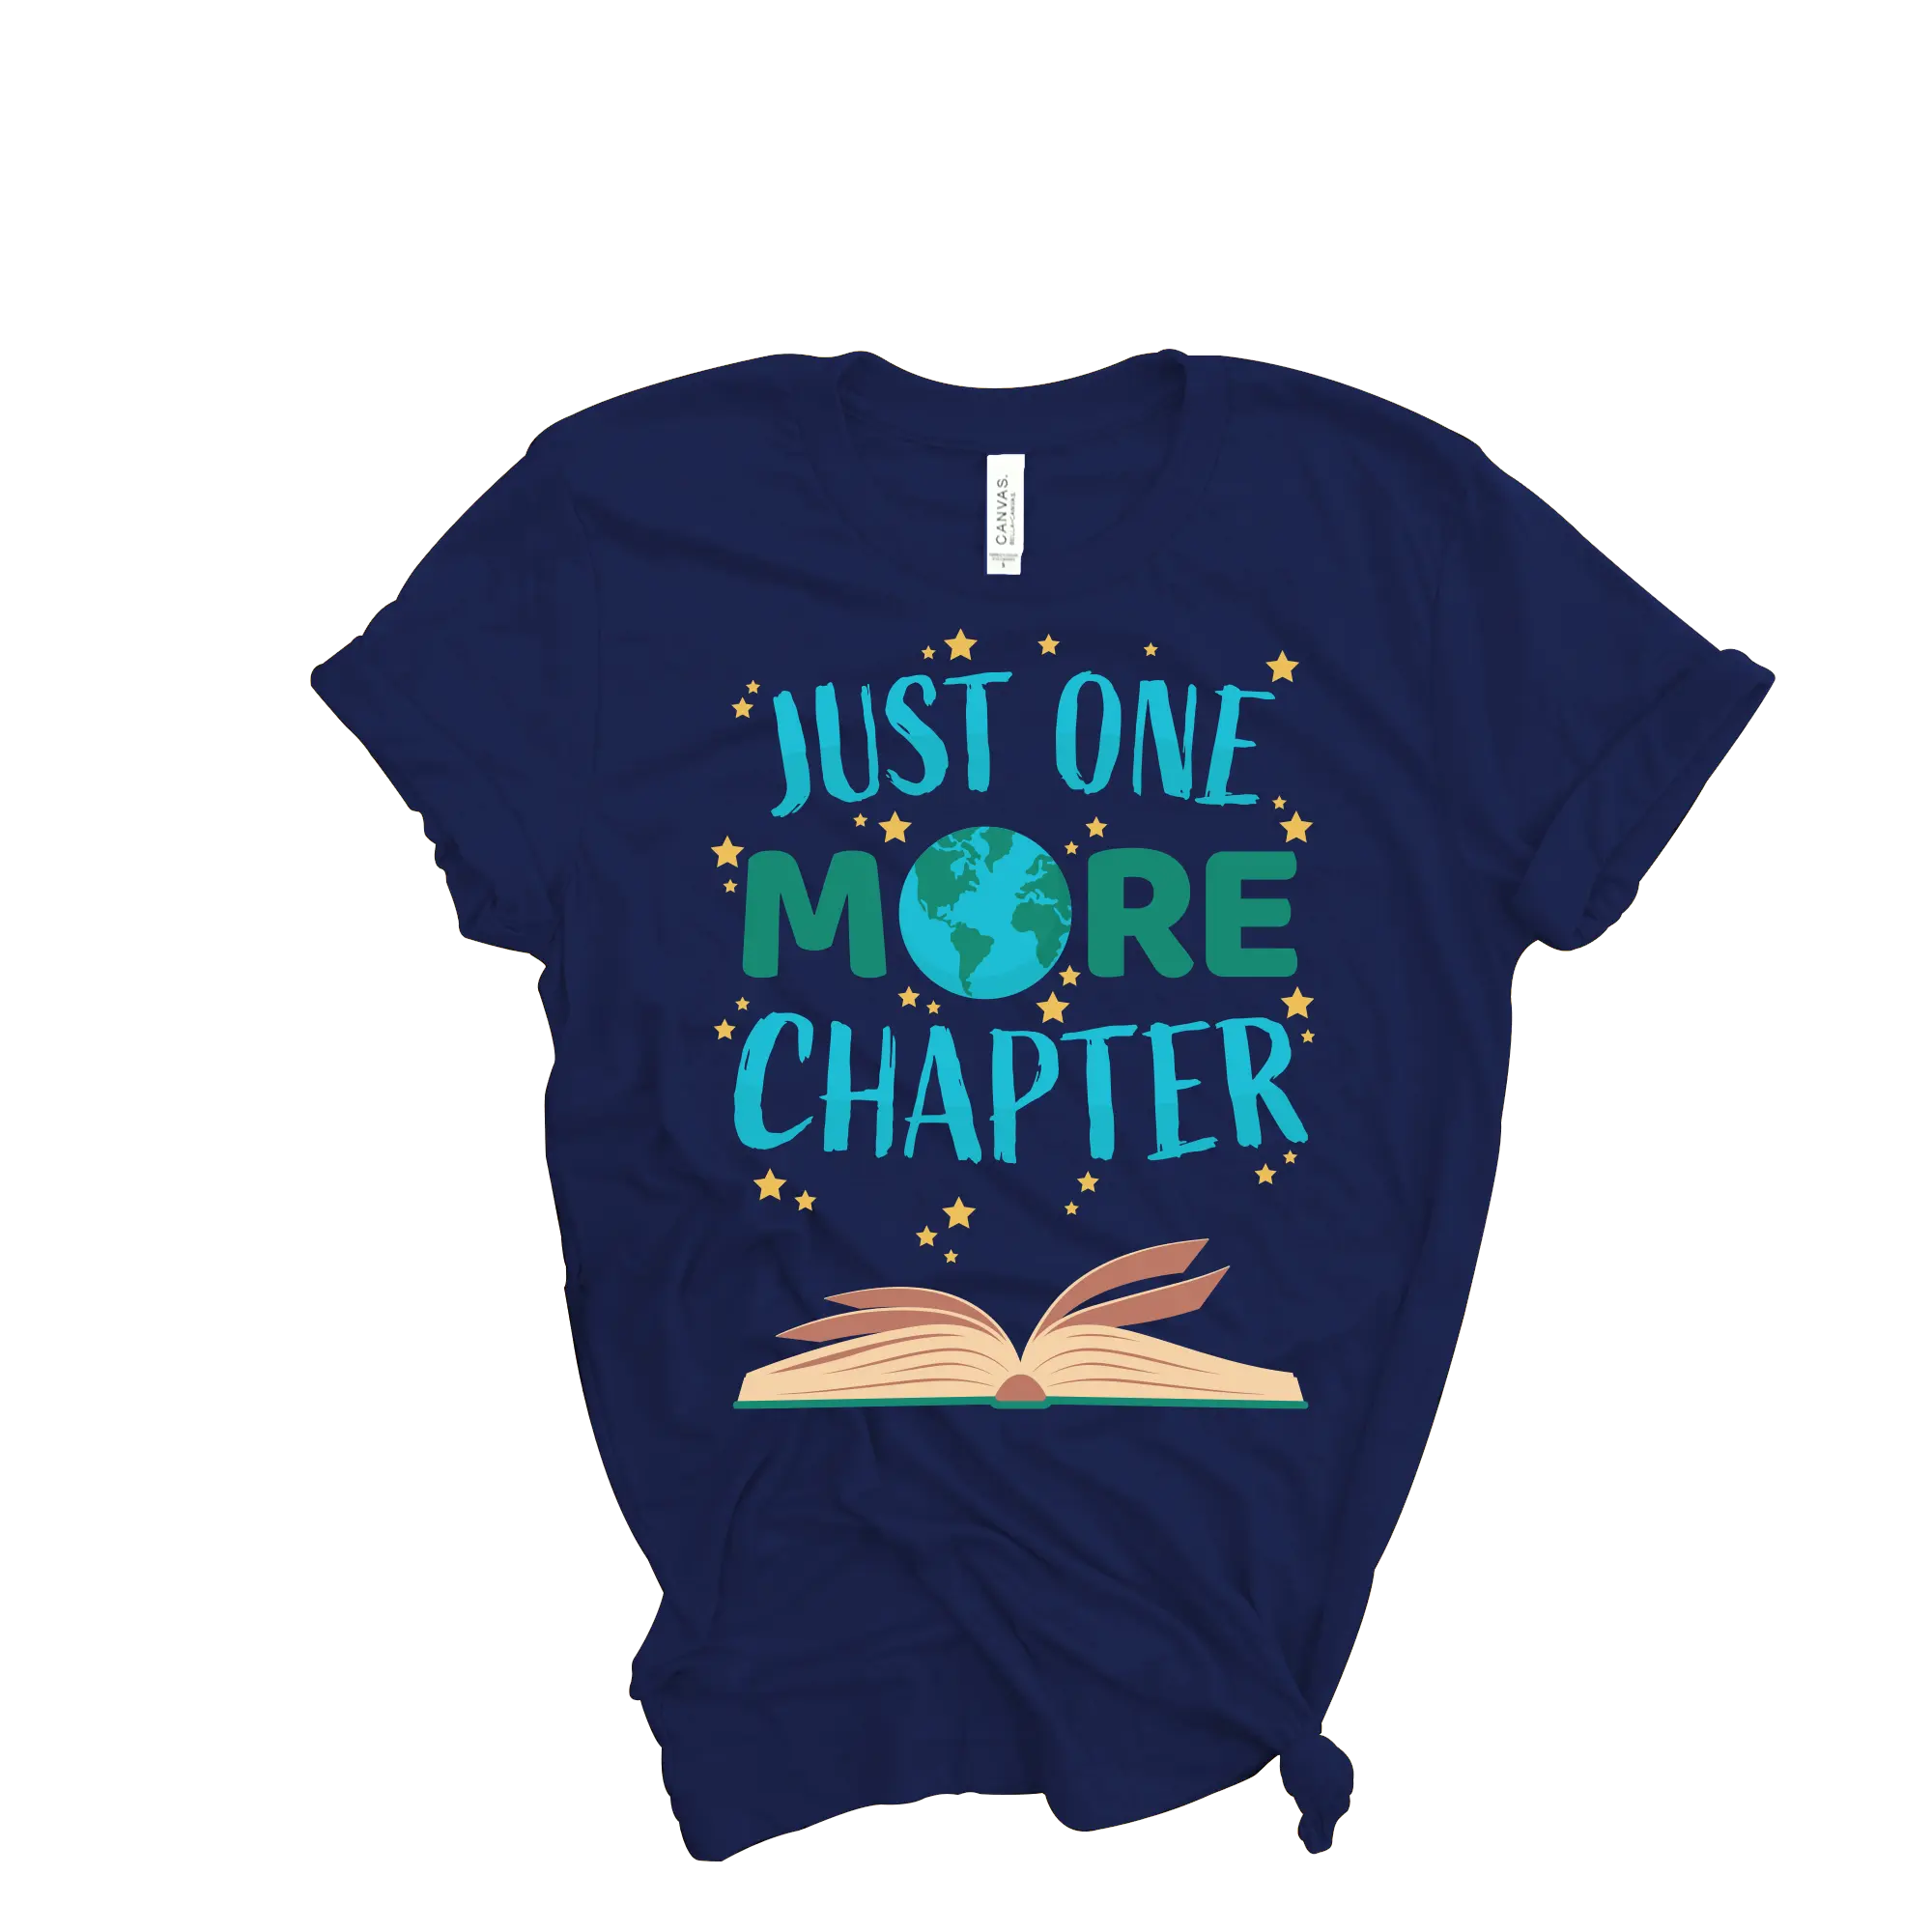 “Just One More Chapter” Tee